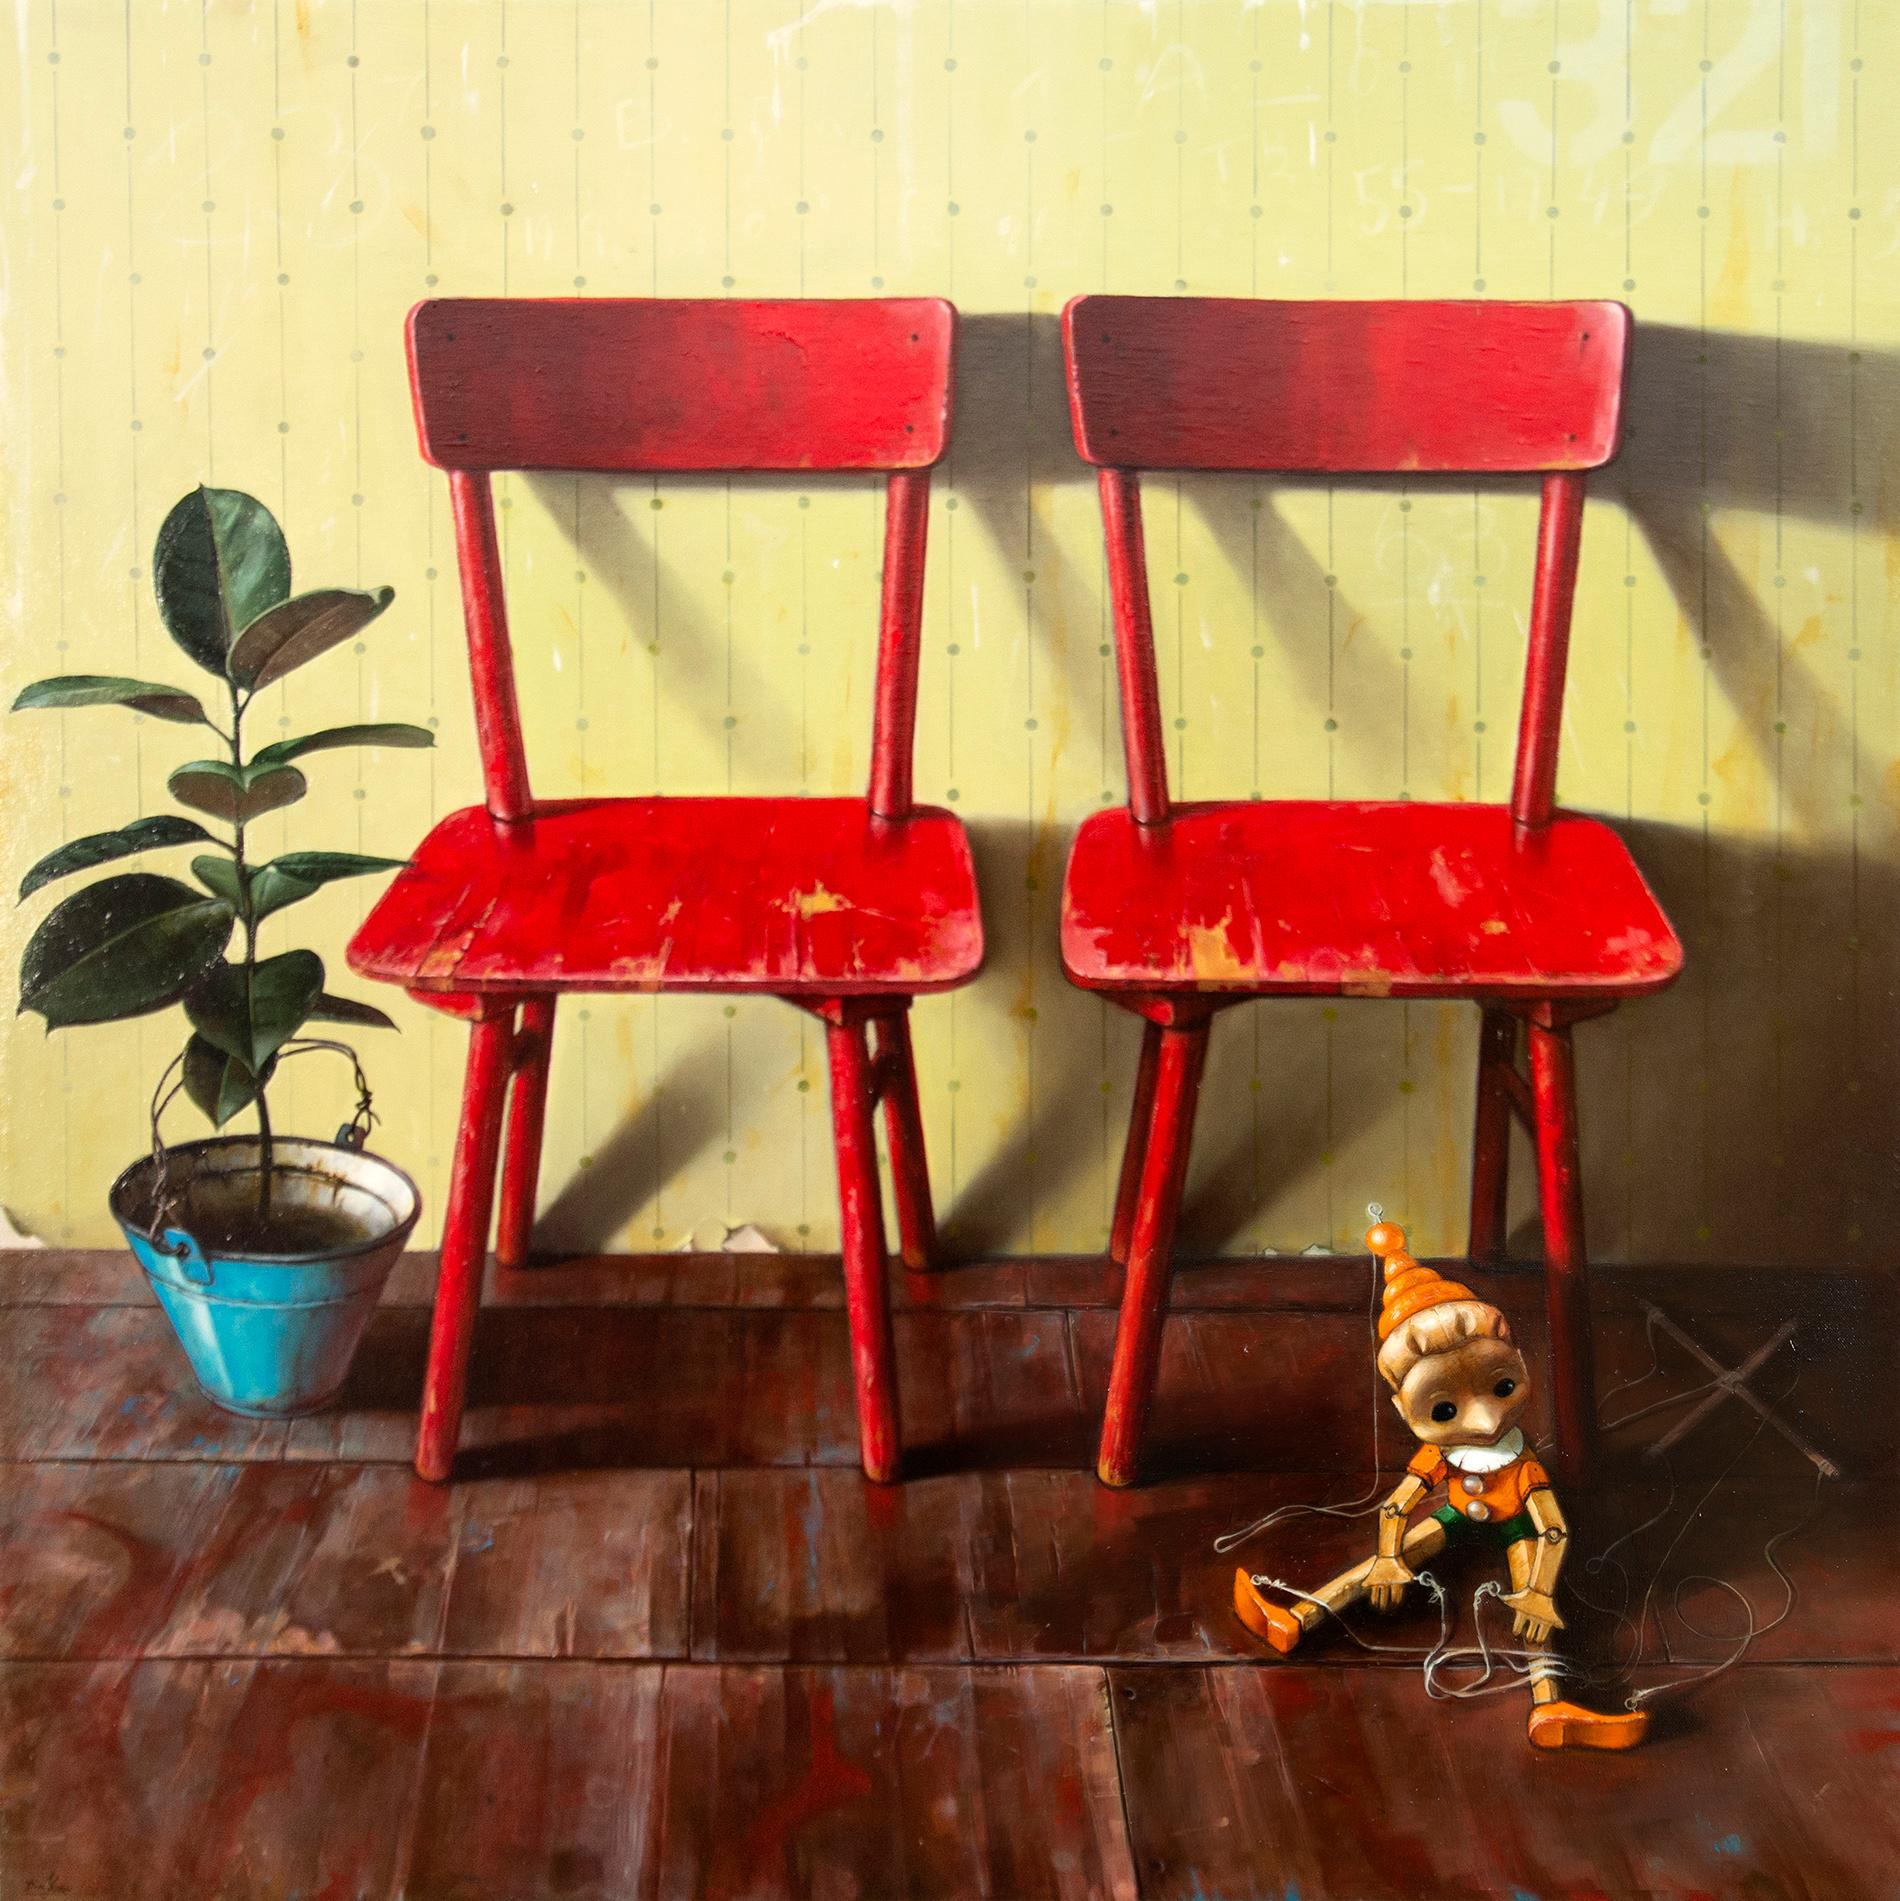 Two Red Chairs and Pinocchio - realist, interior, Ukrainian, Israeli, oil/canvas